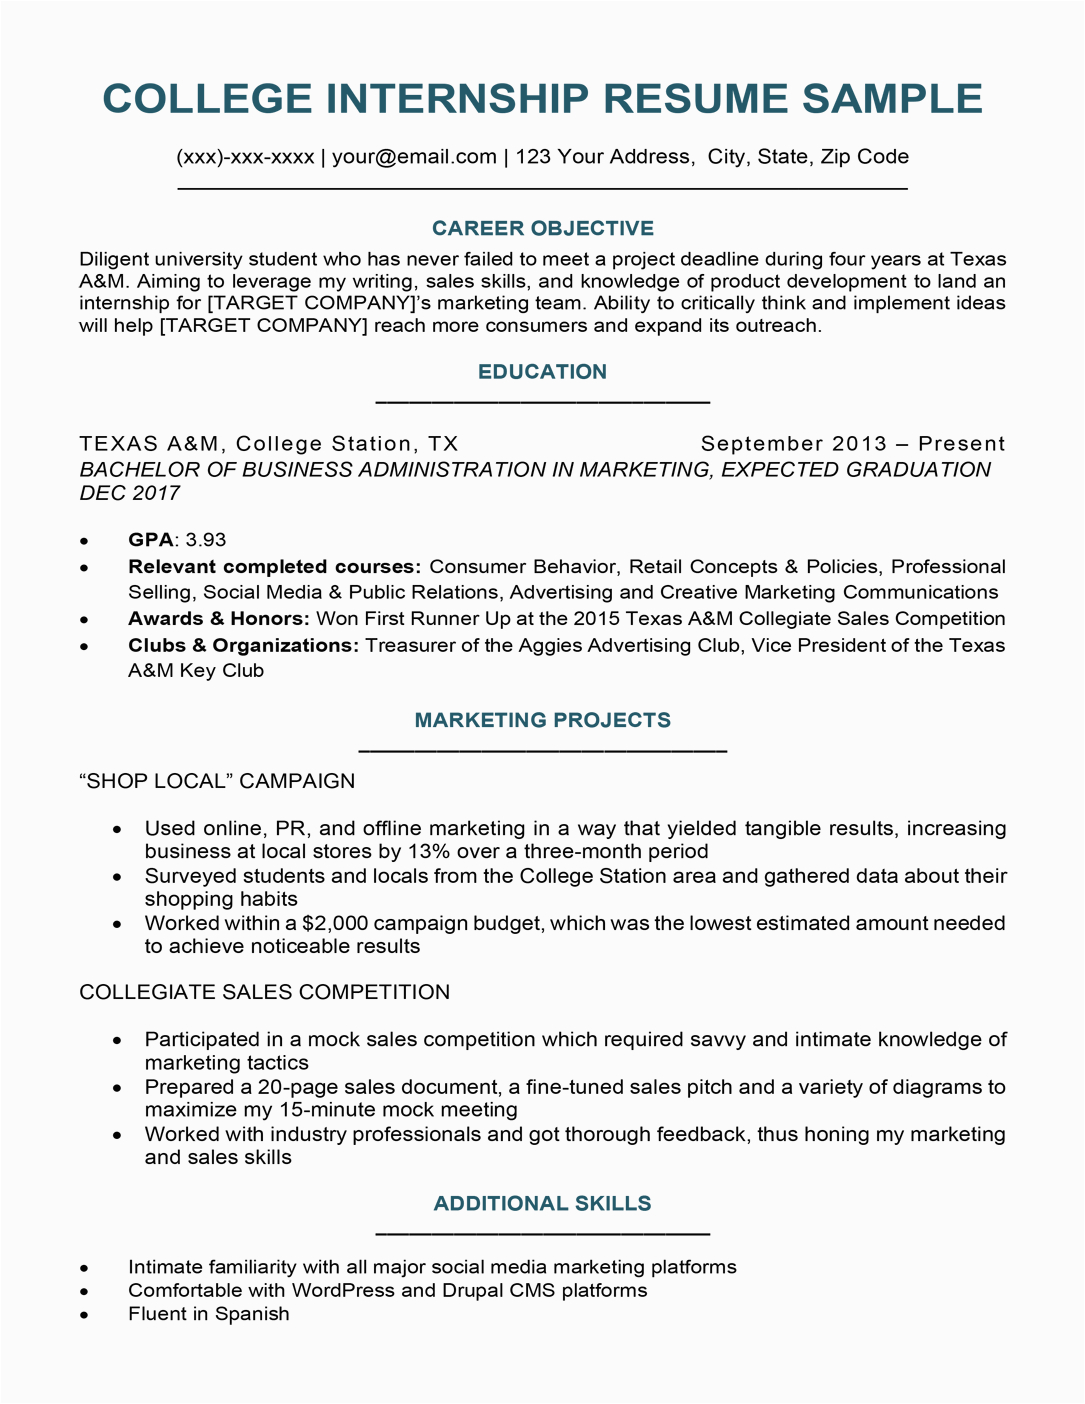 Sample Resume Objective Statements for College Students College Student Resume Sample & Writing Tips